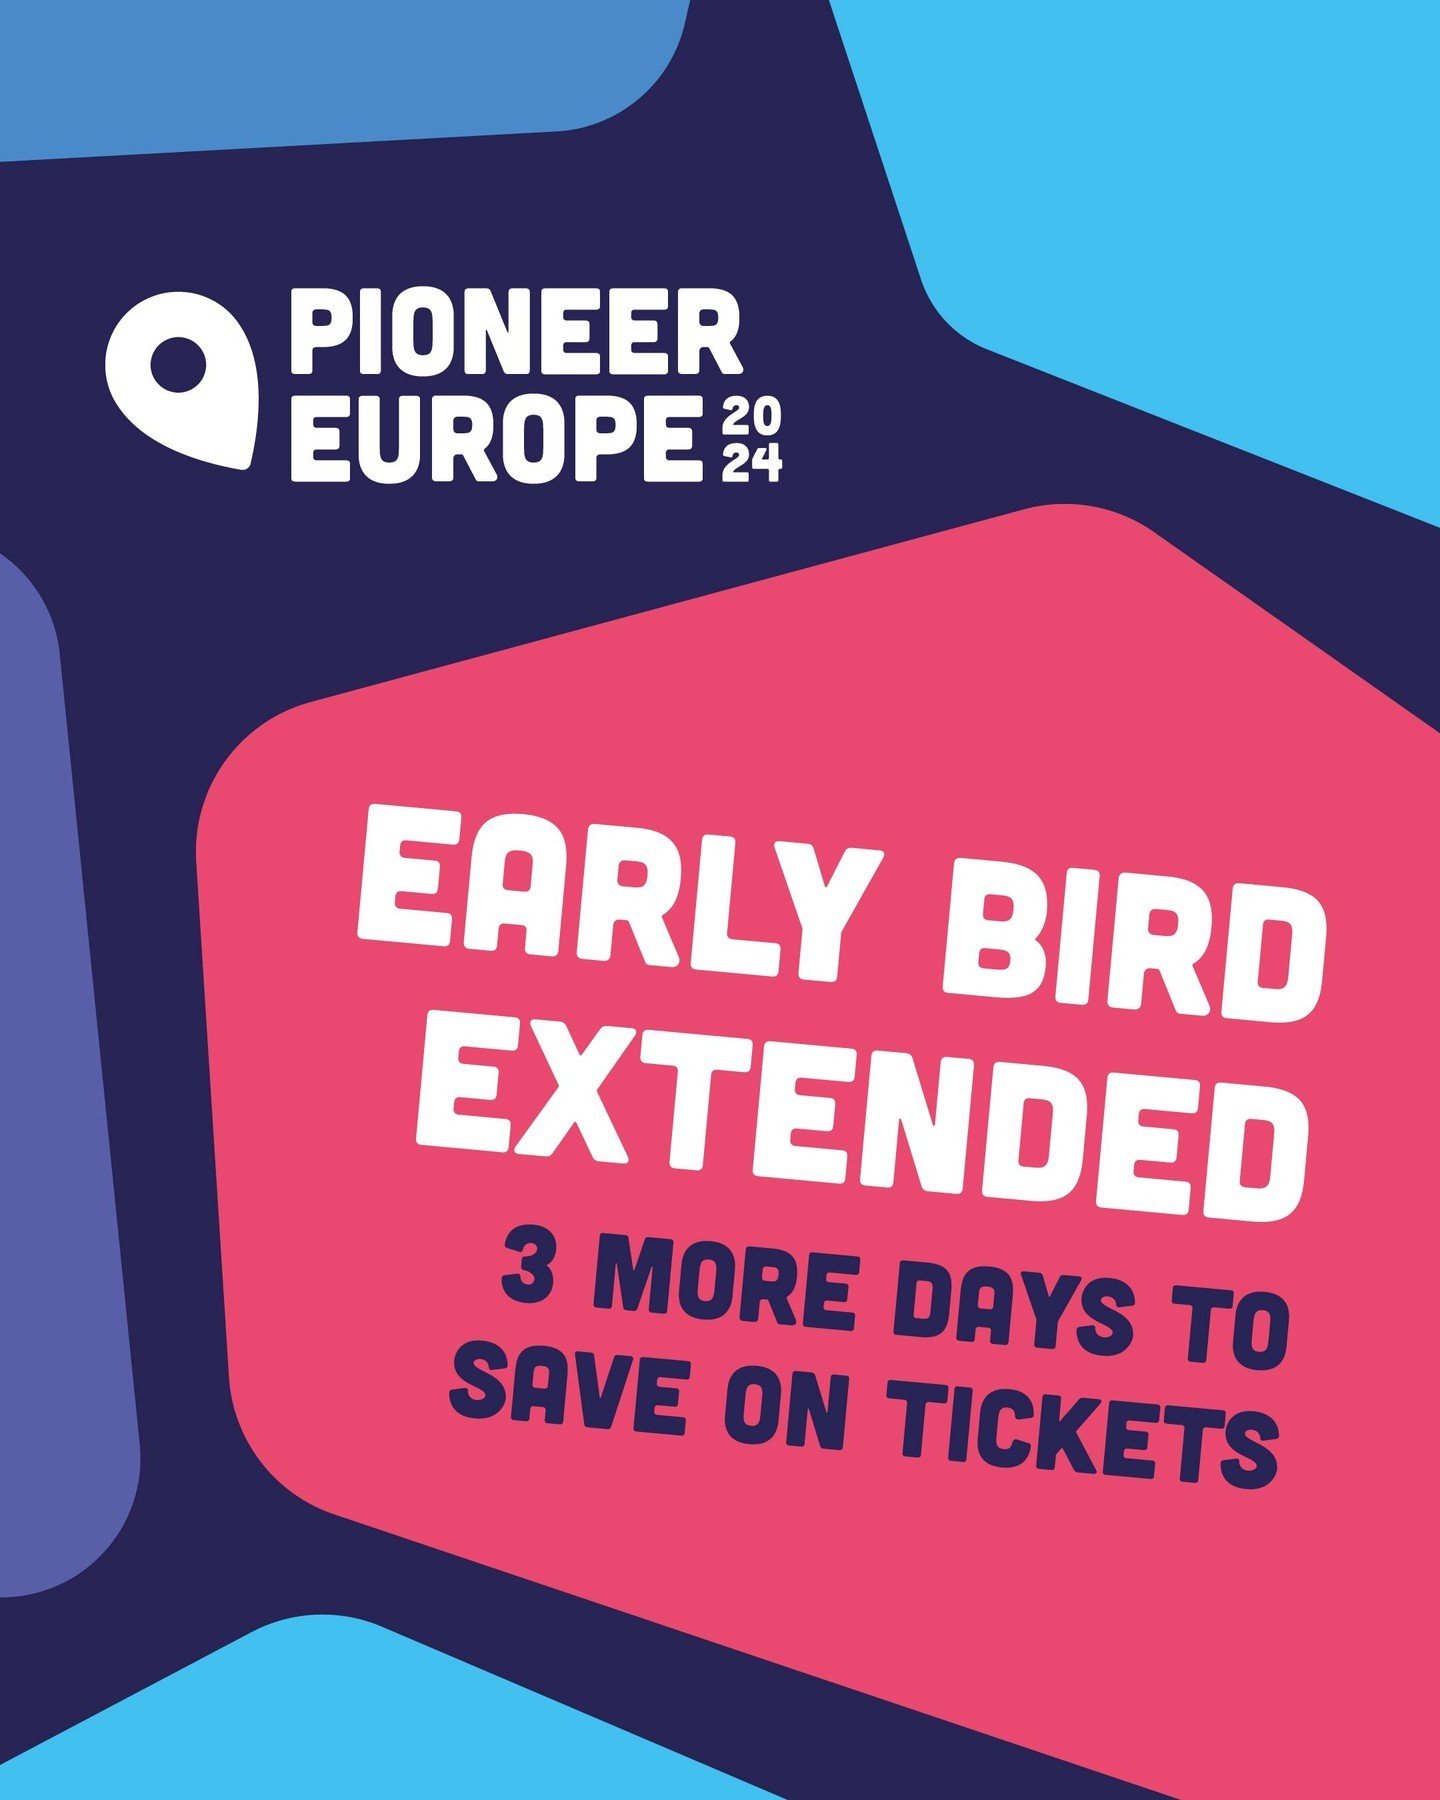 🎉 Calling all pioneers, planters, leaders and supporters! We've extended our early bird prices - book before midnight, 3rd June to save on tickets.⁠
⁠
pioneereuropeconference.com/book⁠
⁠
Pioneer Europe | 25-28 September 2024 | M&aacute;laga, Spain